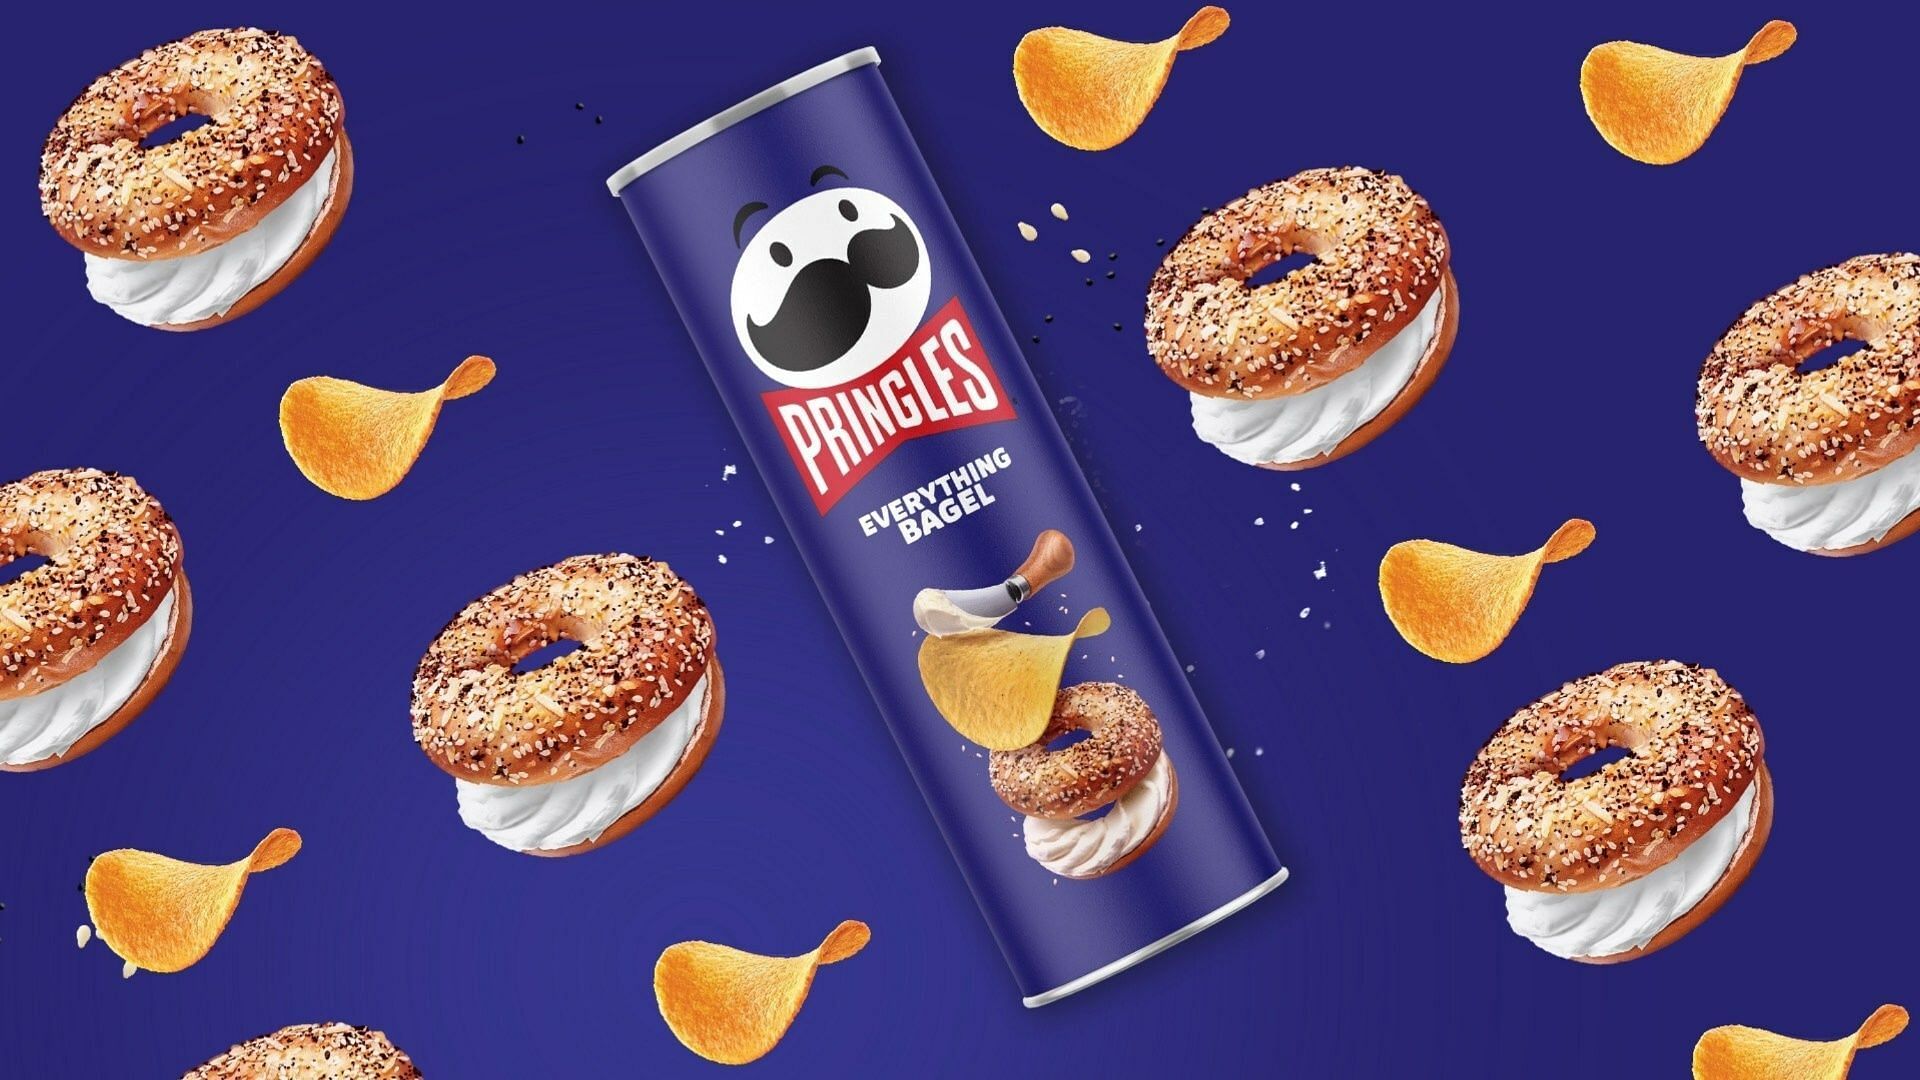 Pringles &lsquo;Everything Bagel&rsquo; crisps take inspiration from the popular &lsquo;Everything Bagel&rsquo; seasoning (Image via Kellogg Company)